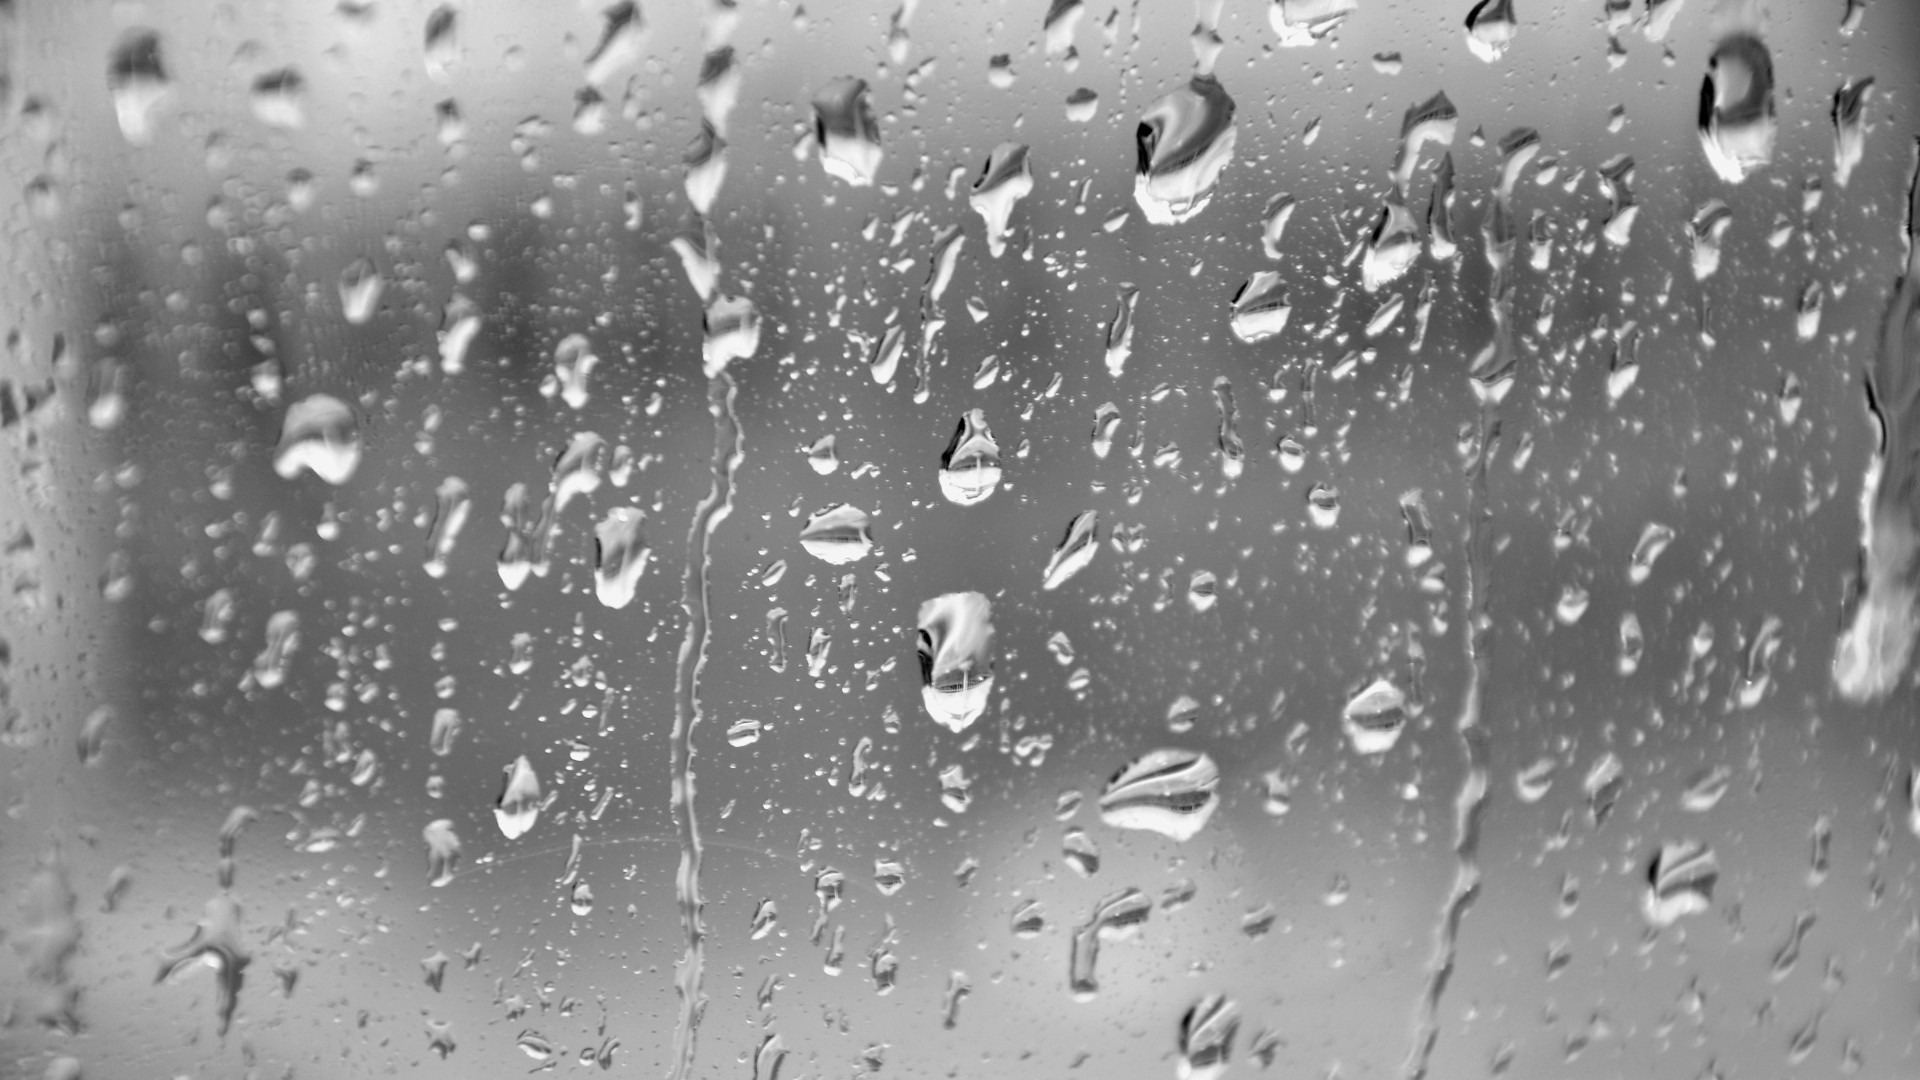 Black and white rain glass wet surface textures water drops background wallpaperx1080